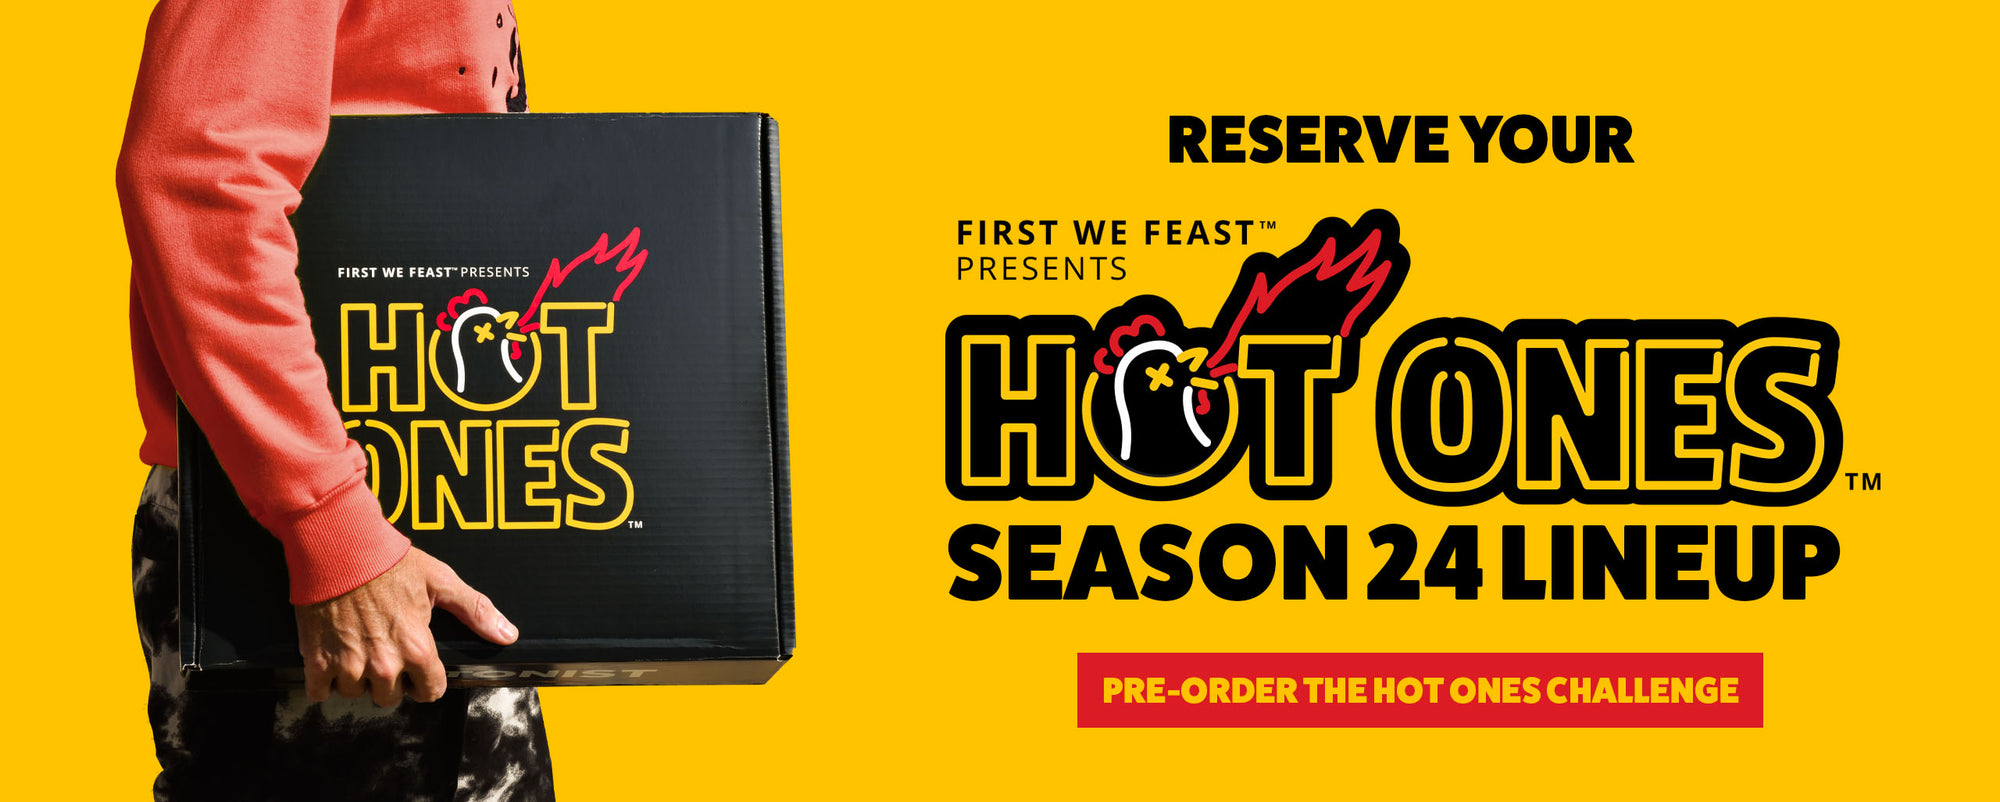 Reserve your hot ones hot sauce lineup